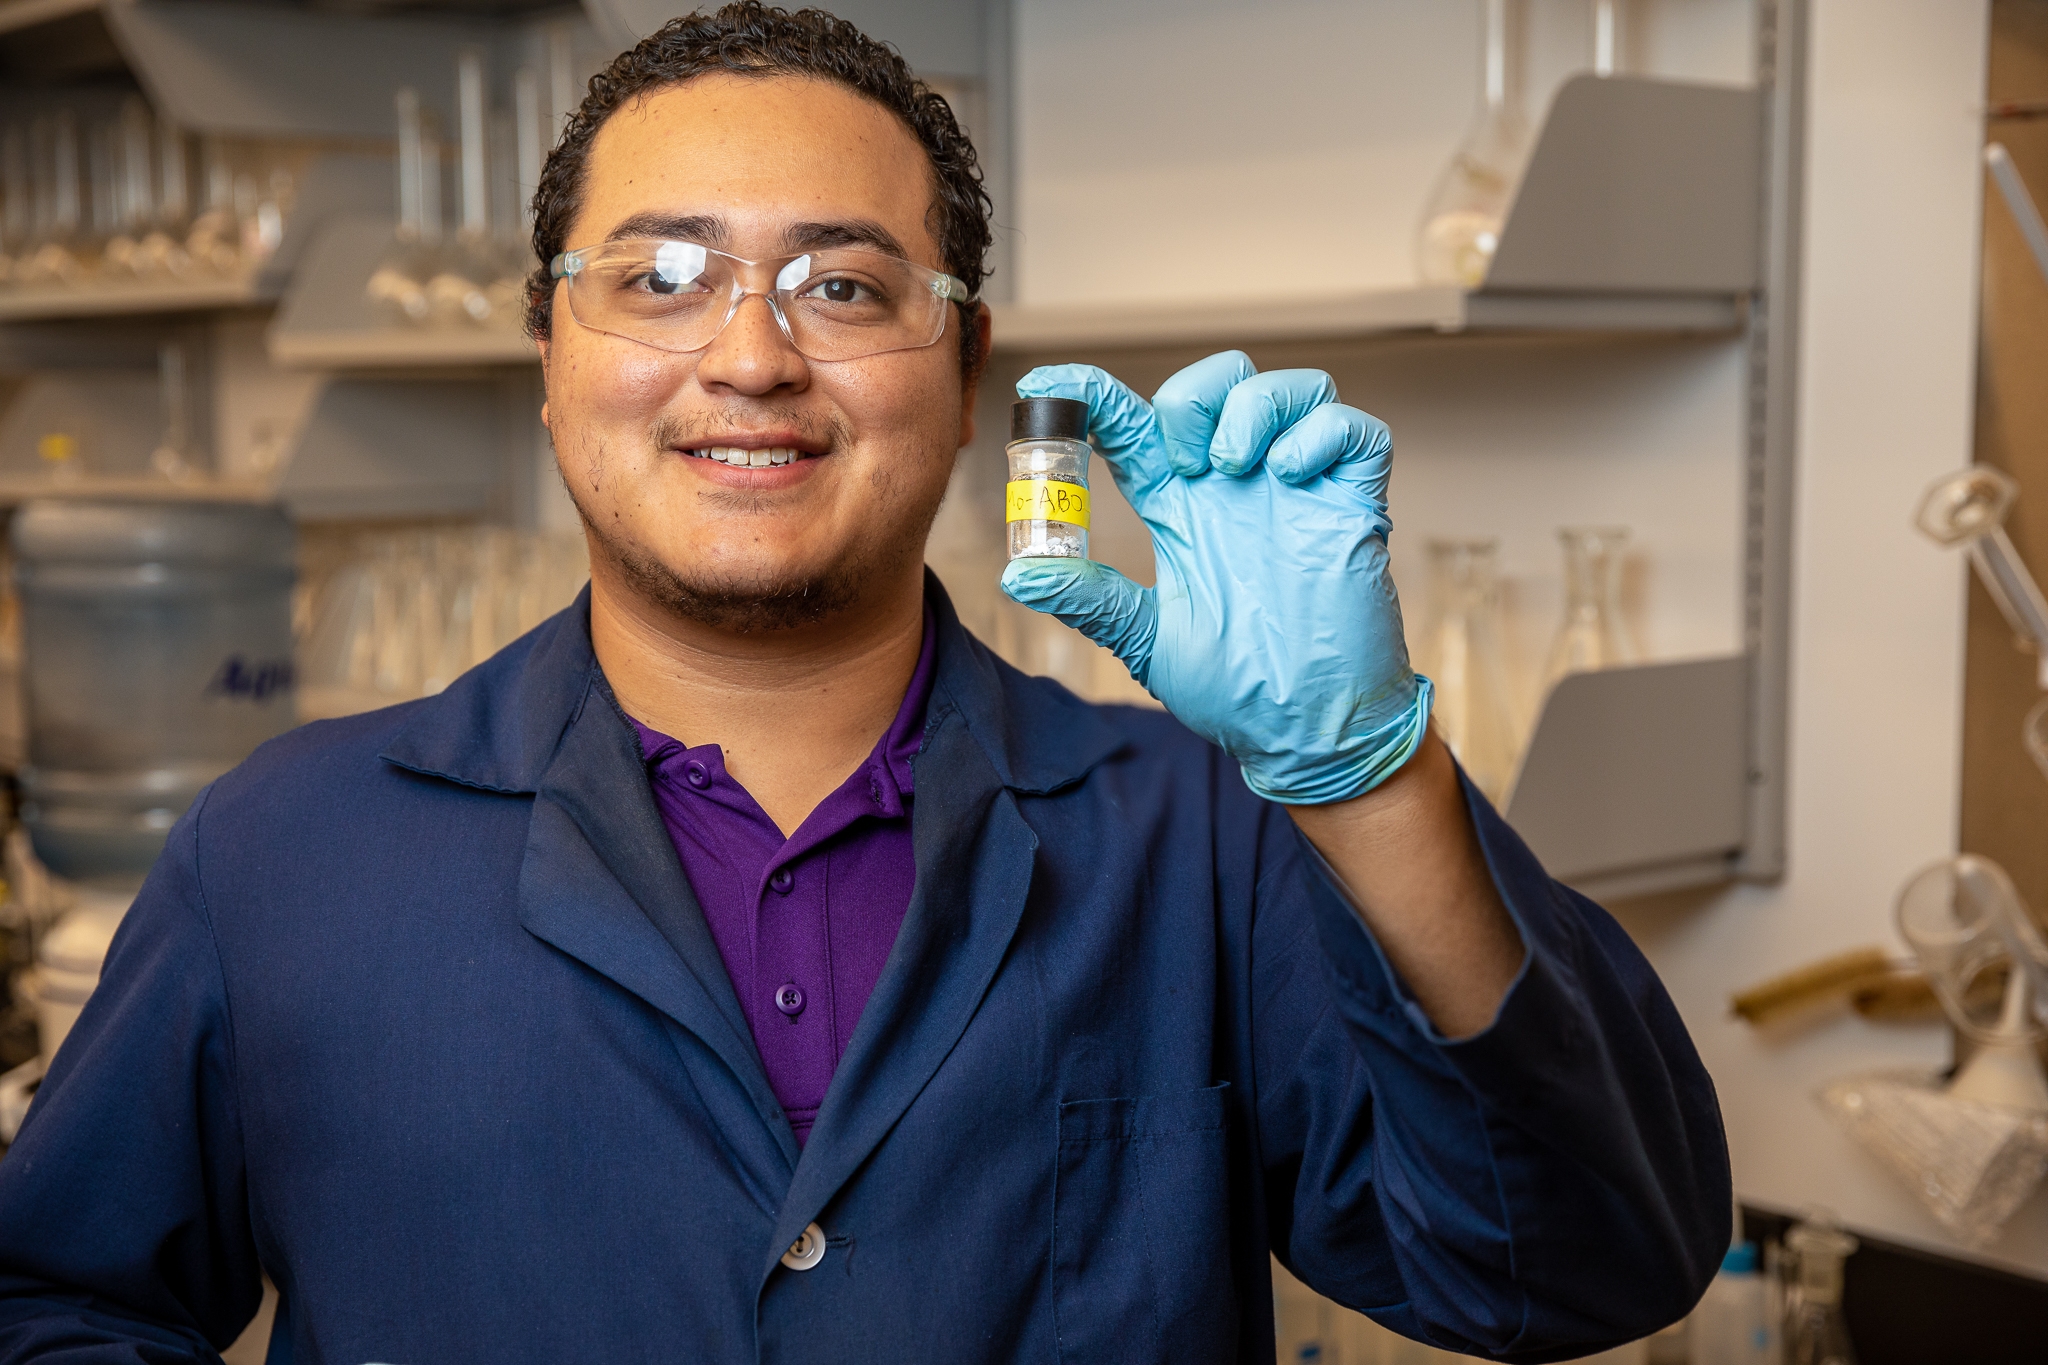 Diego Zometa Paniagua is a research scientist in ACU's NEXT Lab.